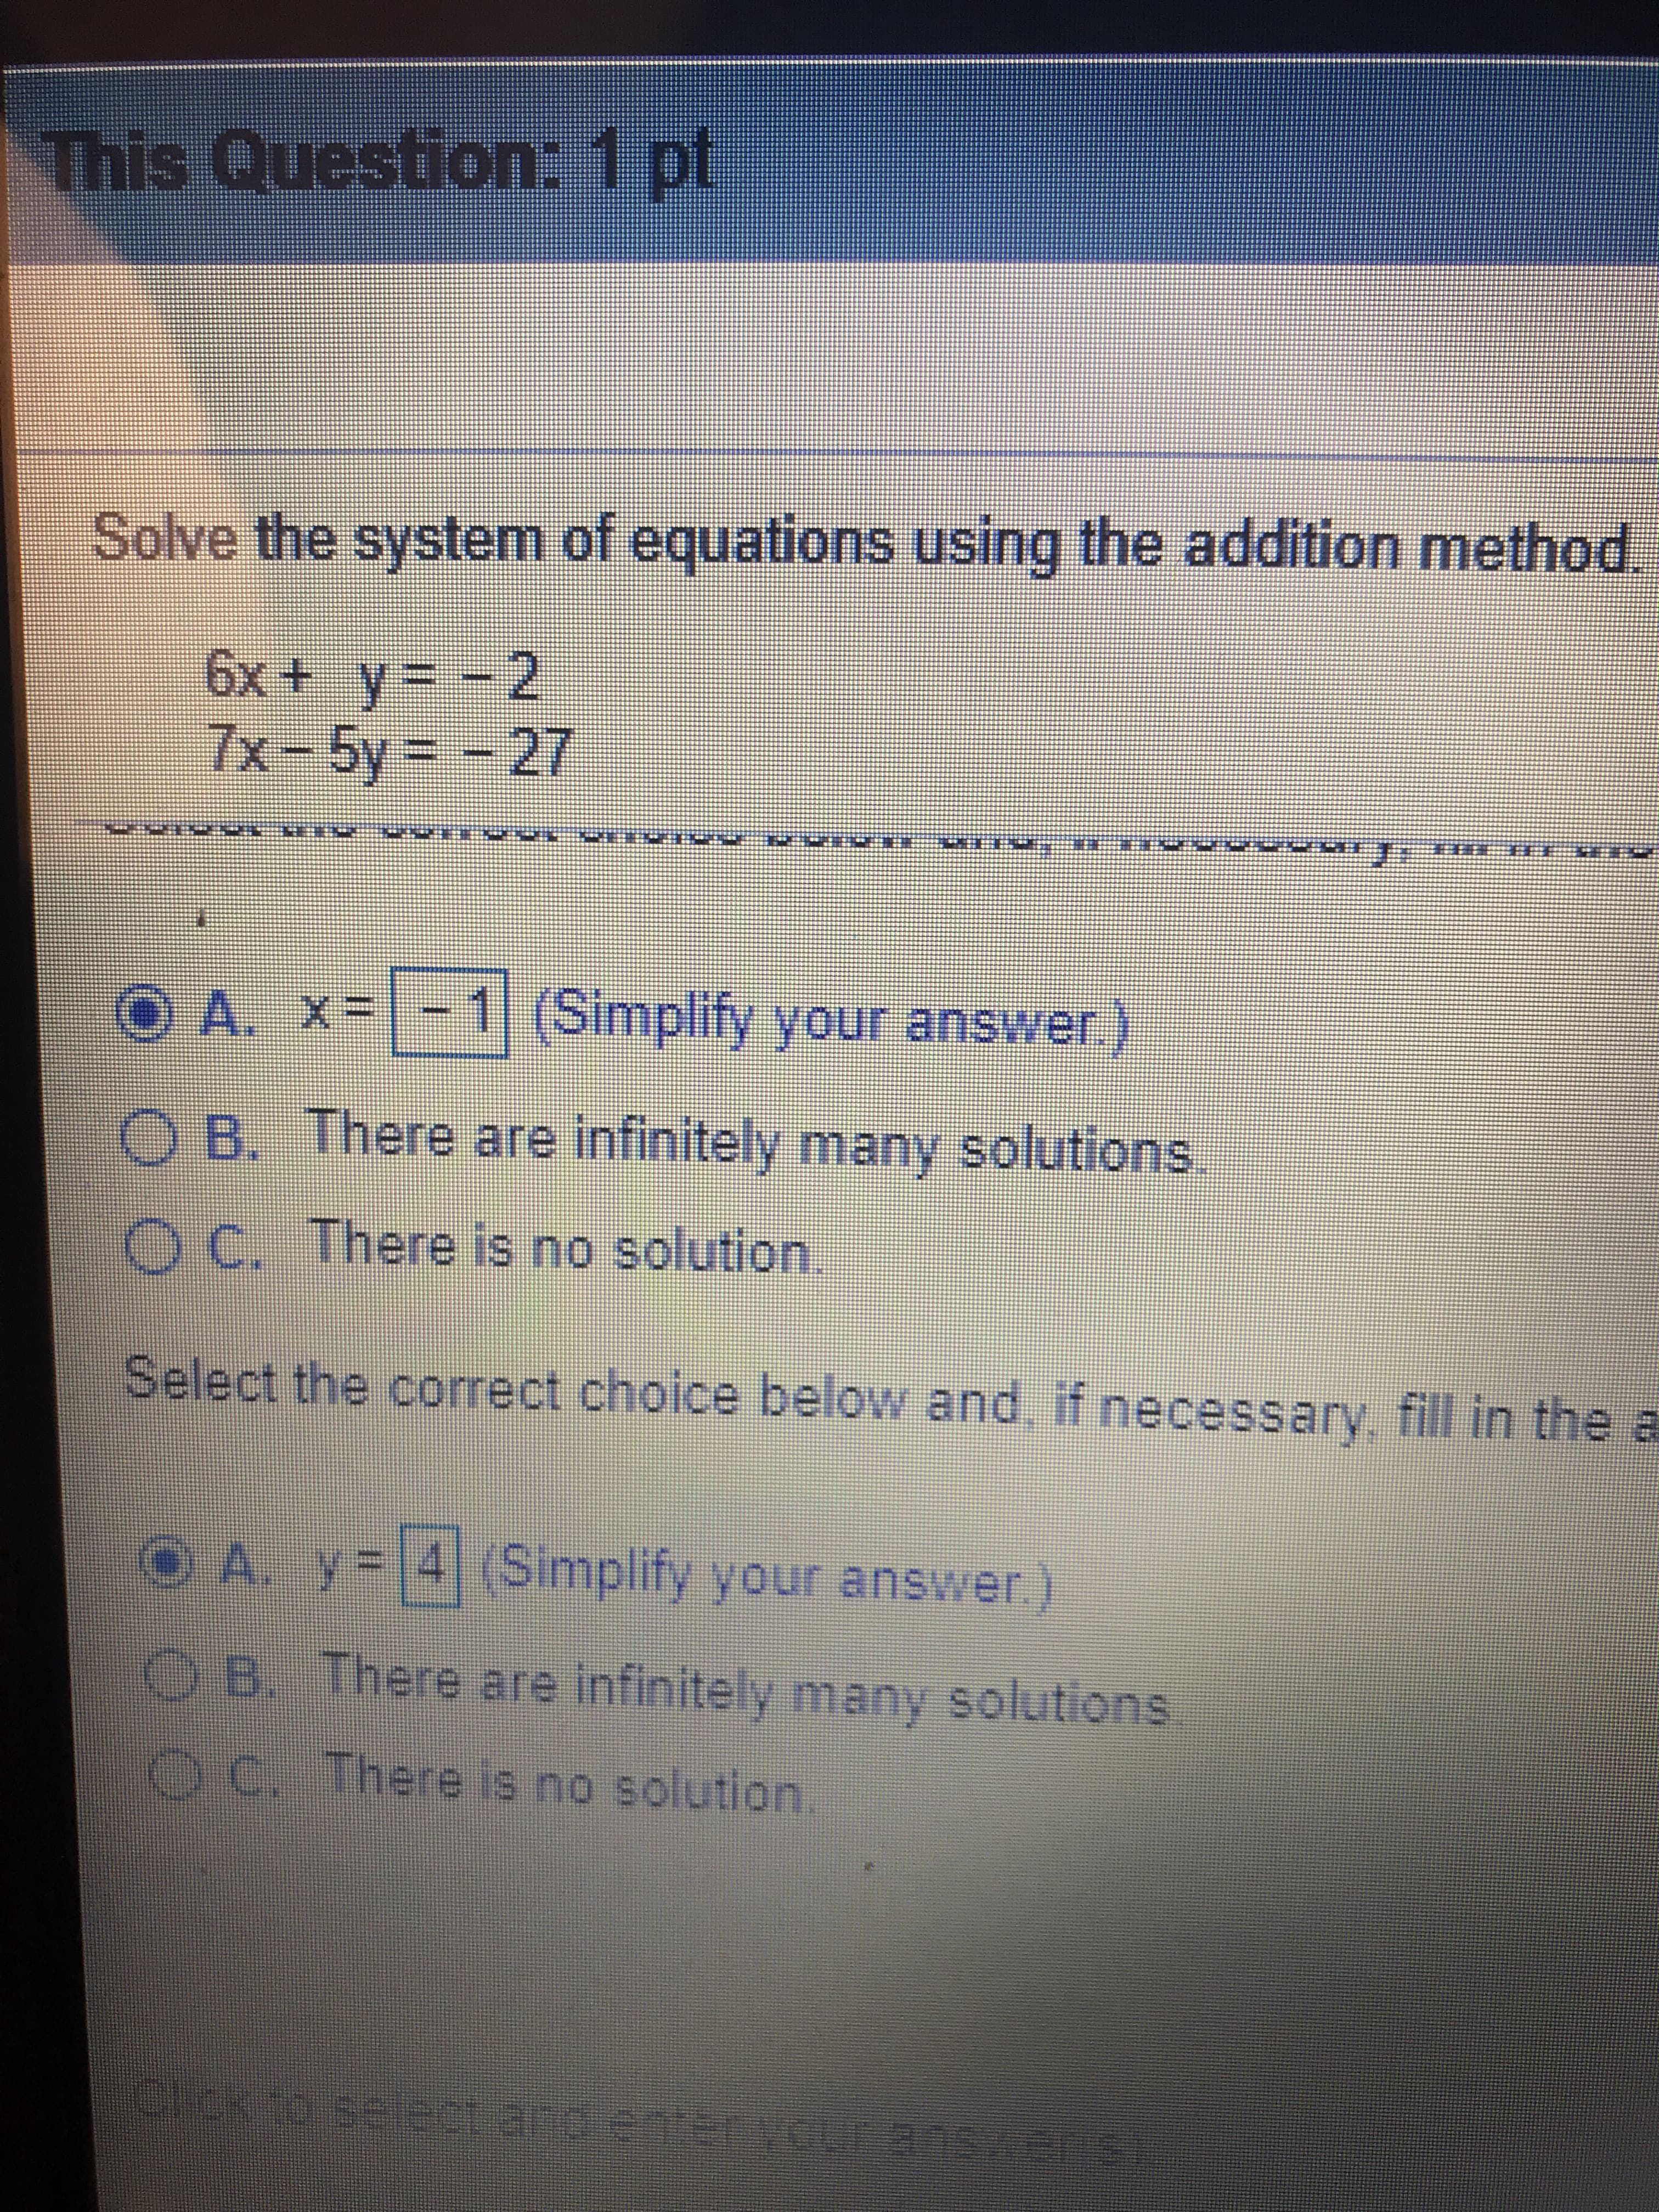 This Question: 1 pt
Solve the system of equations using the addition method.
6x+ y-2
Tx-5y27
-1| (Simplify your answer)
O A. X
O B. There are infinitely many solutions.
Oc. There is no solution.
Select the correct choice below and if necessary fill In the a
O A. y 41 (Simplify your answer
9 B. There are infinitely many solutions
e c. There is no solution.
eheh 10 512et and cnter OUE 2037
T
S
